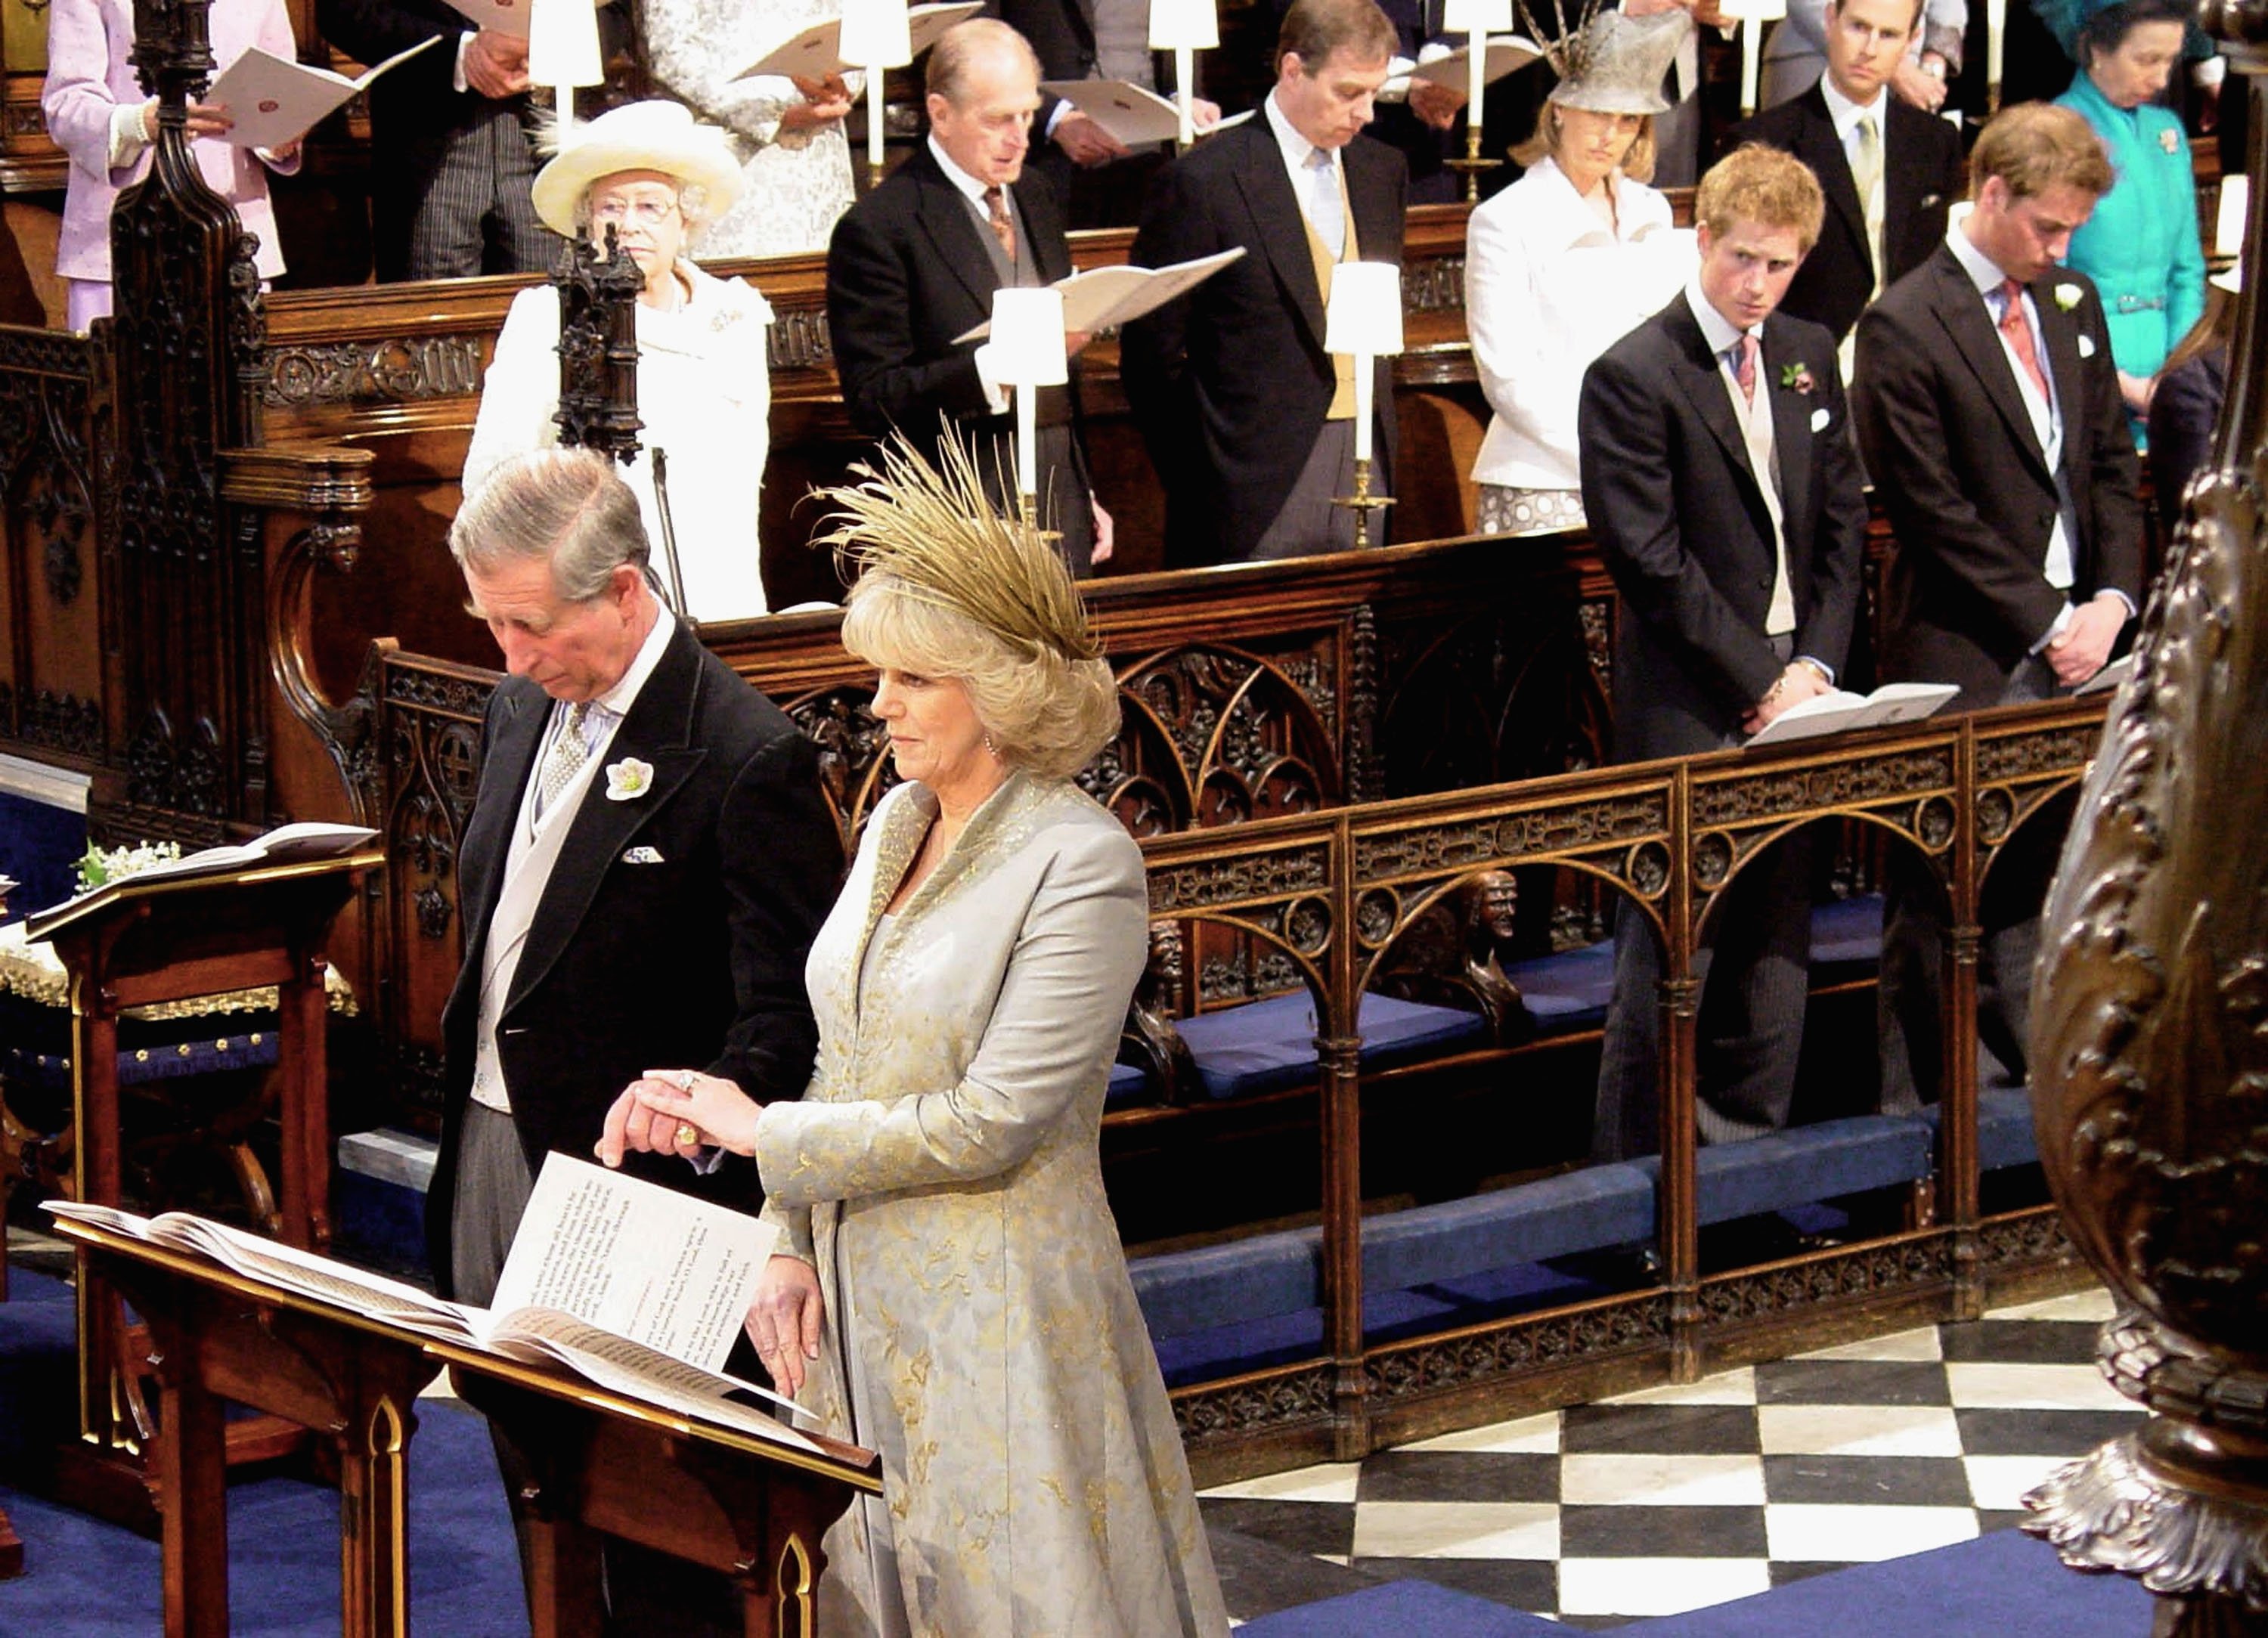 Prince Charles and Camilla Parker Bowles attend the Service of Prayer and Dedication blessing their marriage at Windsor Castle on April 9, 2005 in Berkshire, England | Source: Getty Images